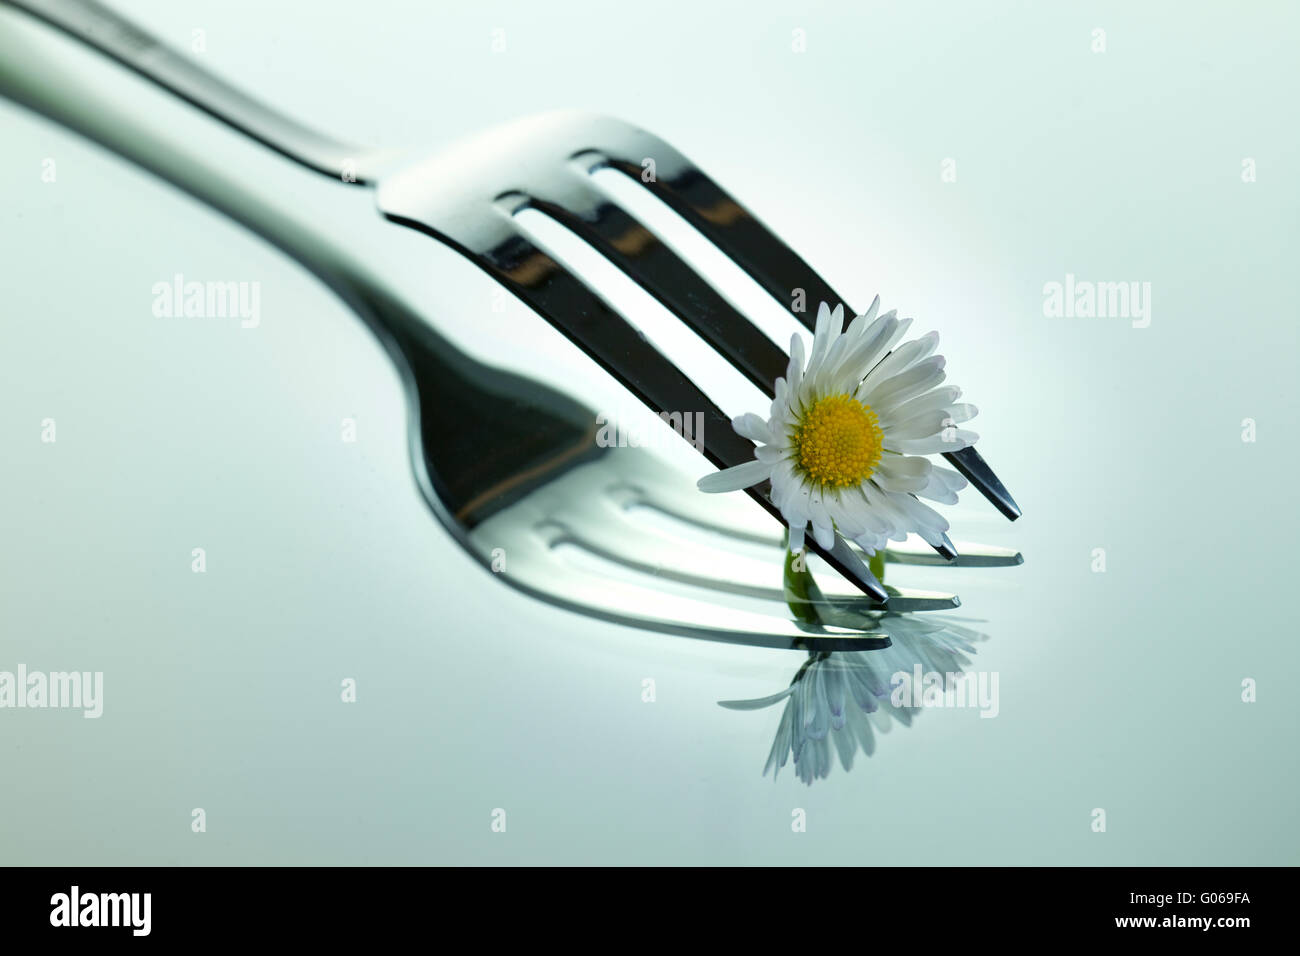 Steel Forks with daisy flower on shiny mirror surface Stock Photo